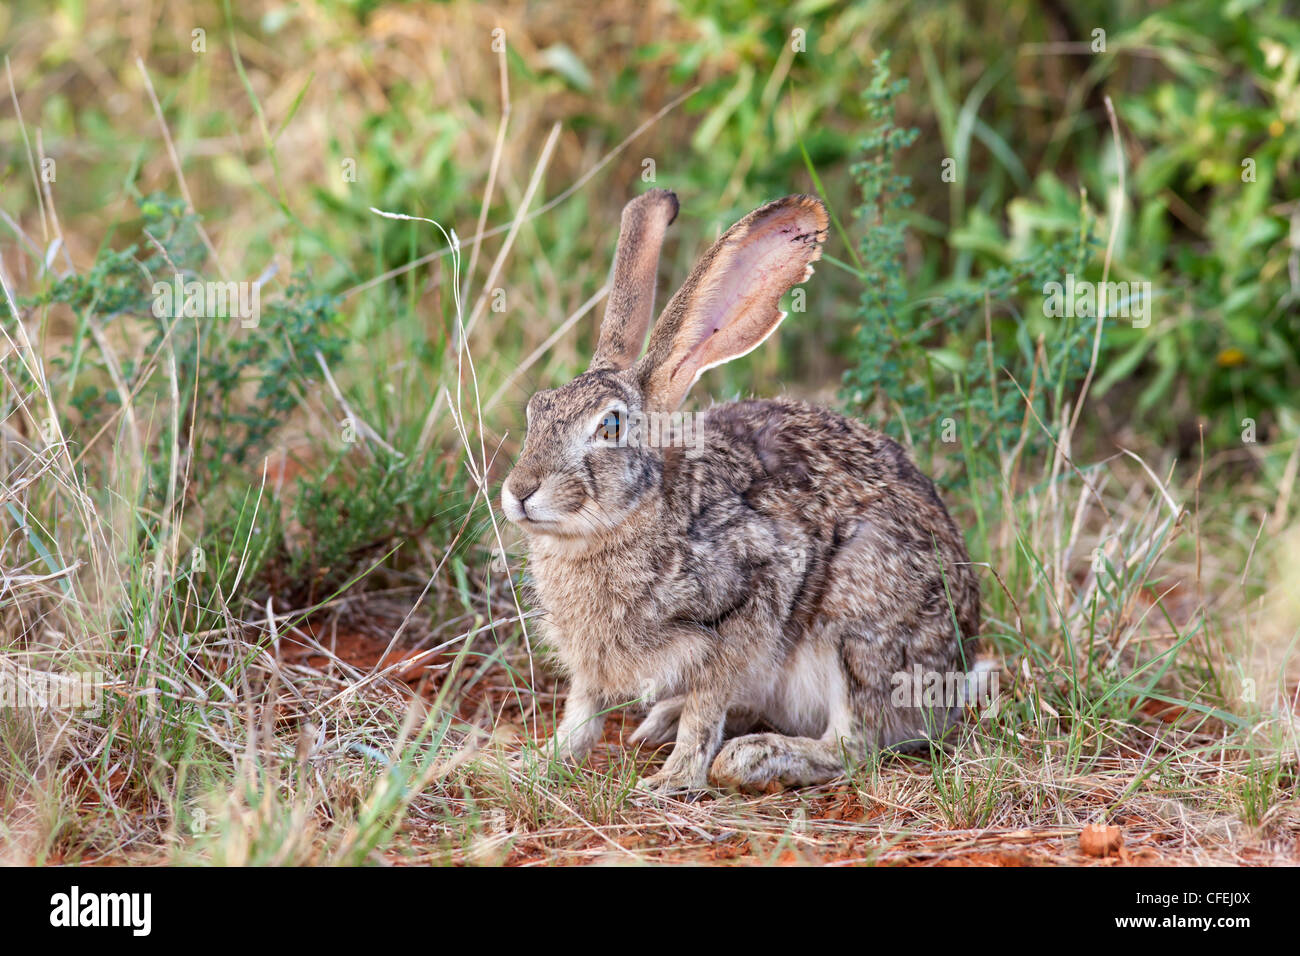 Cape hare, Lepus capensis, Kgalagadi Transfrontier national park, South Africa Stock Photo